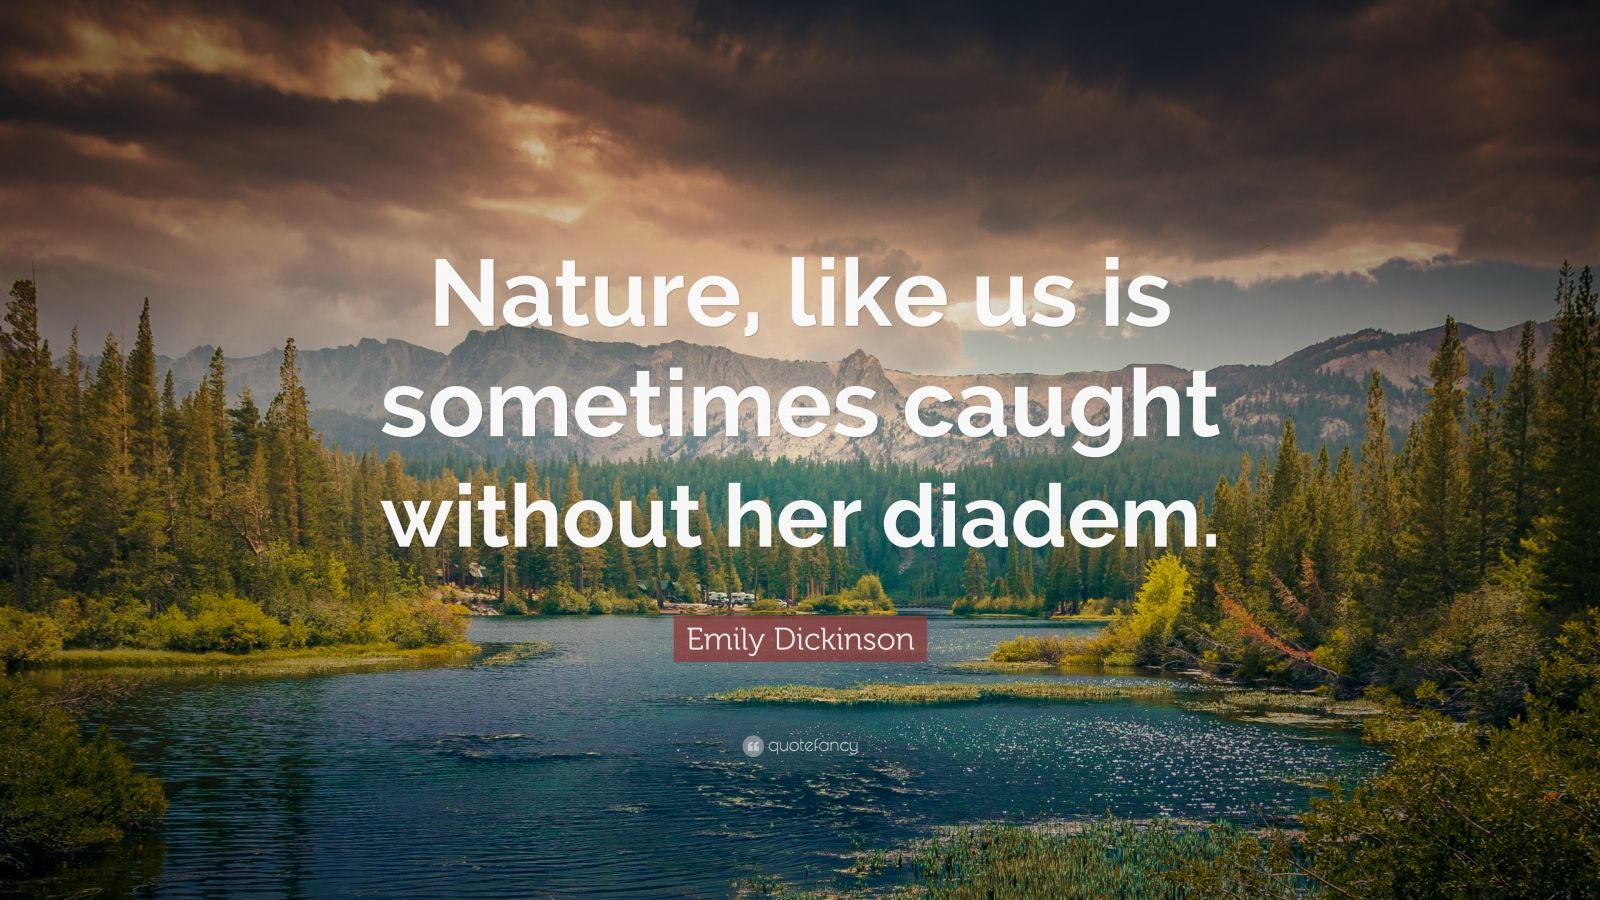 Emily Dickinson Quote: “Nature, like us is sometimes caught without her ...